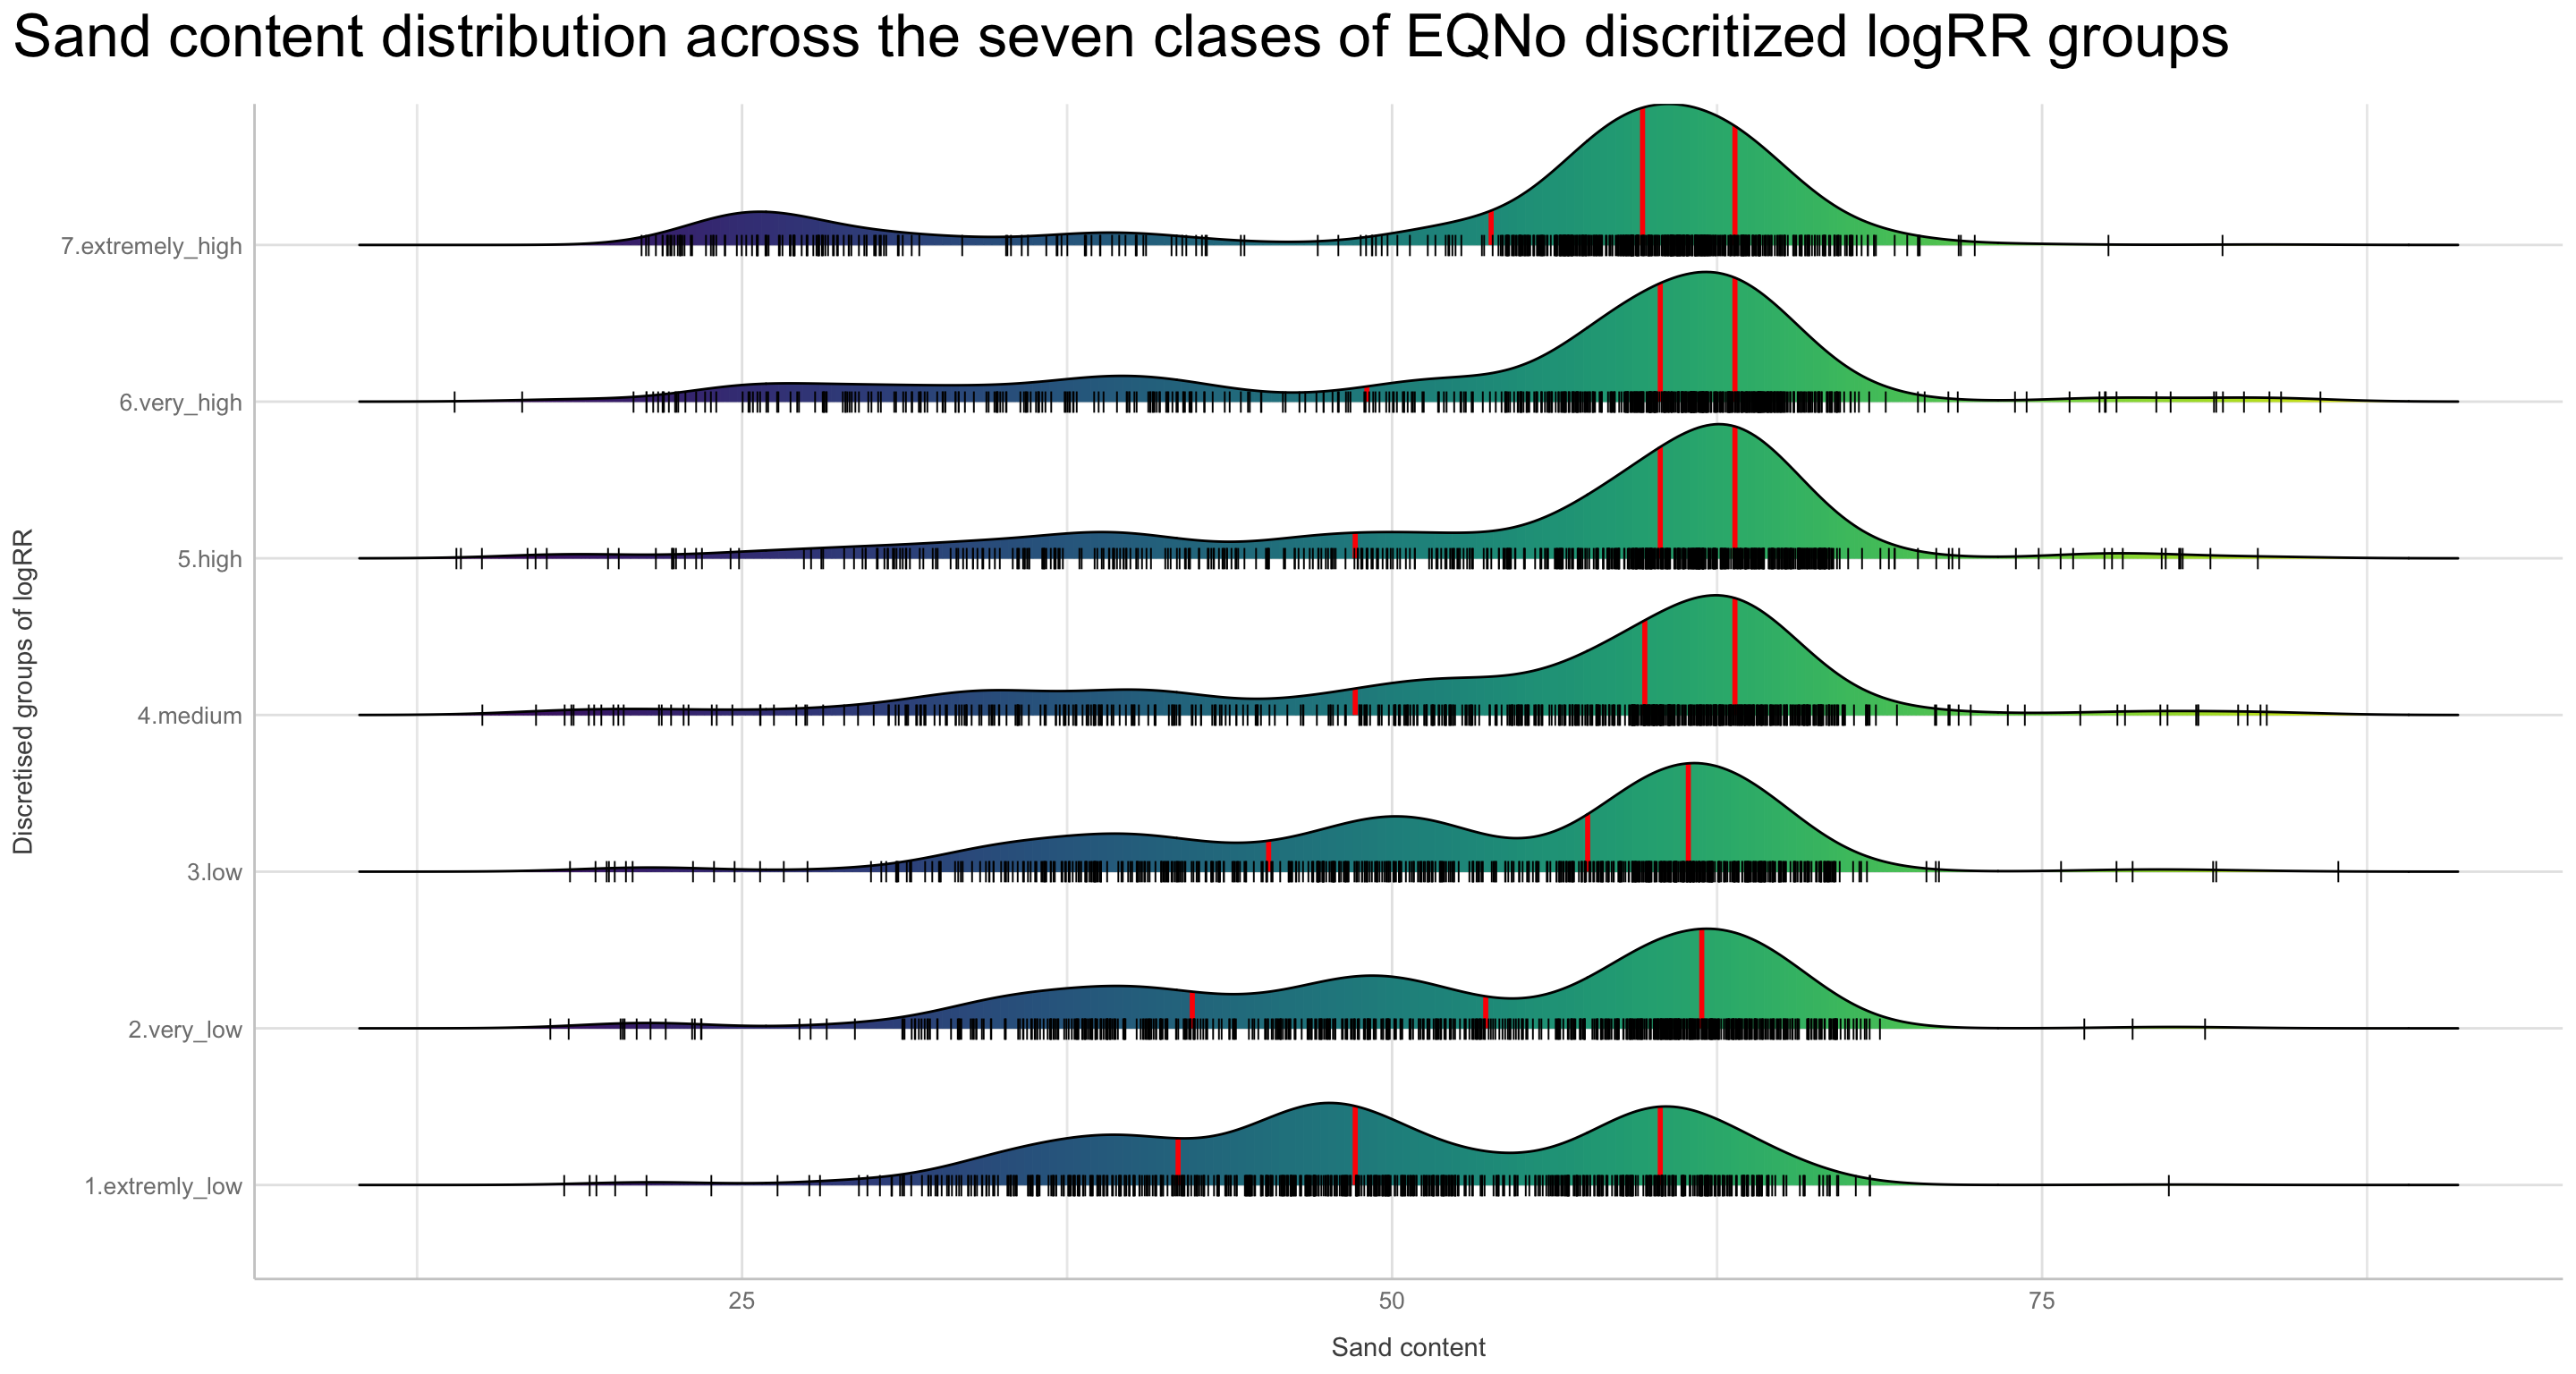 Density ridge plot for sand content distribution across the EQNo discritized logRR groupss